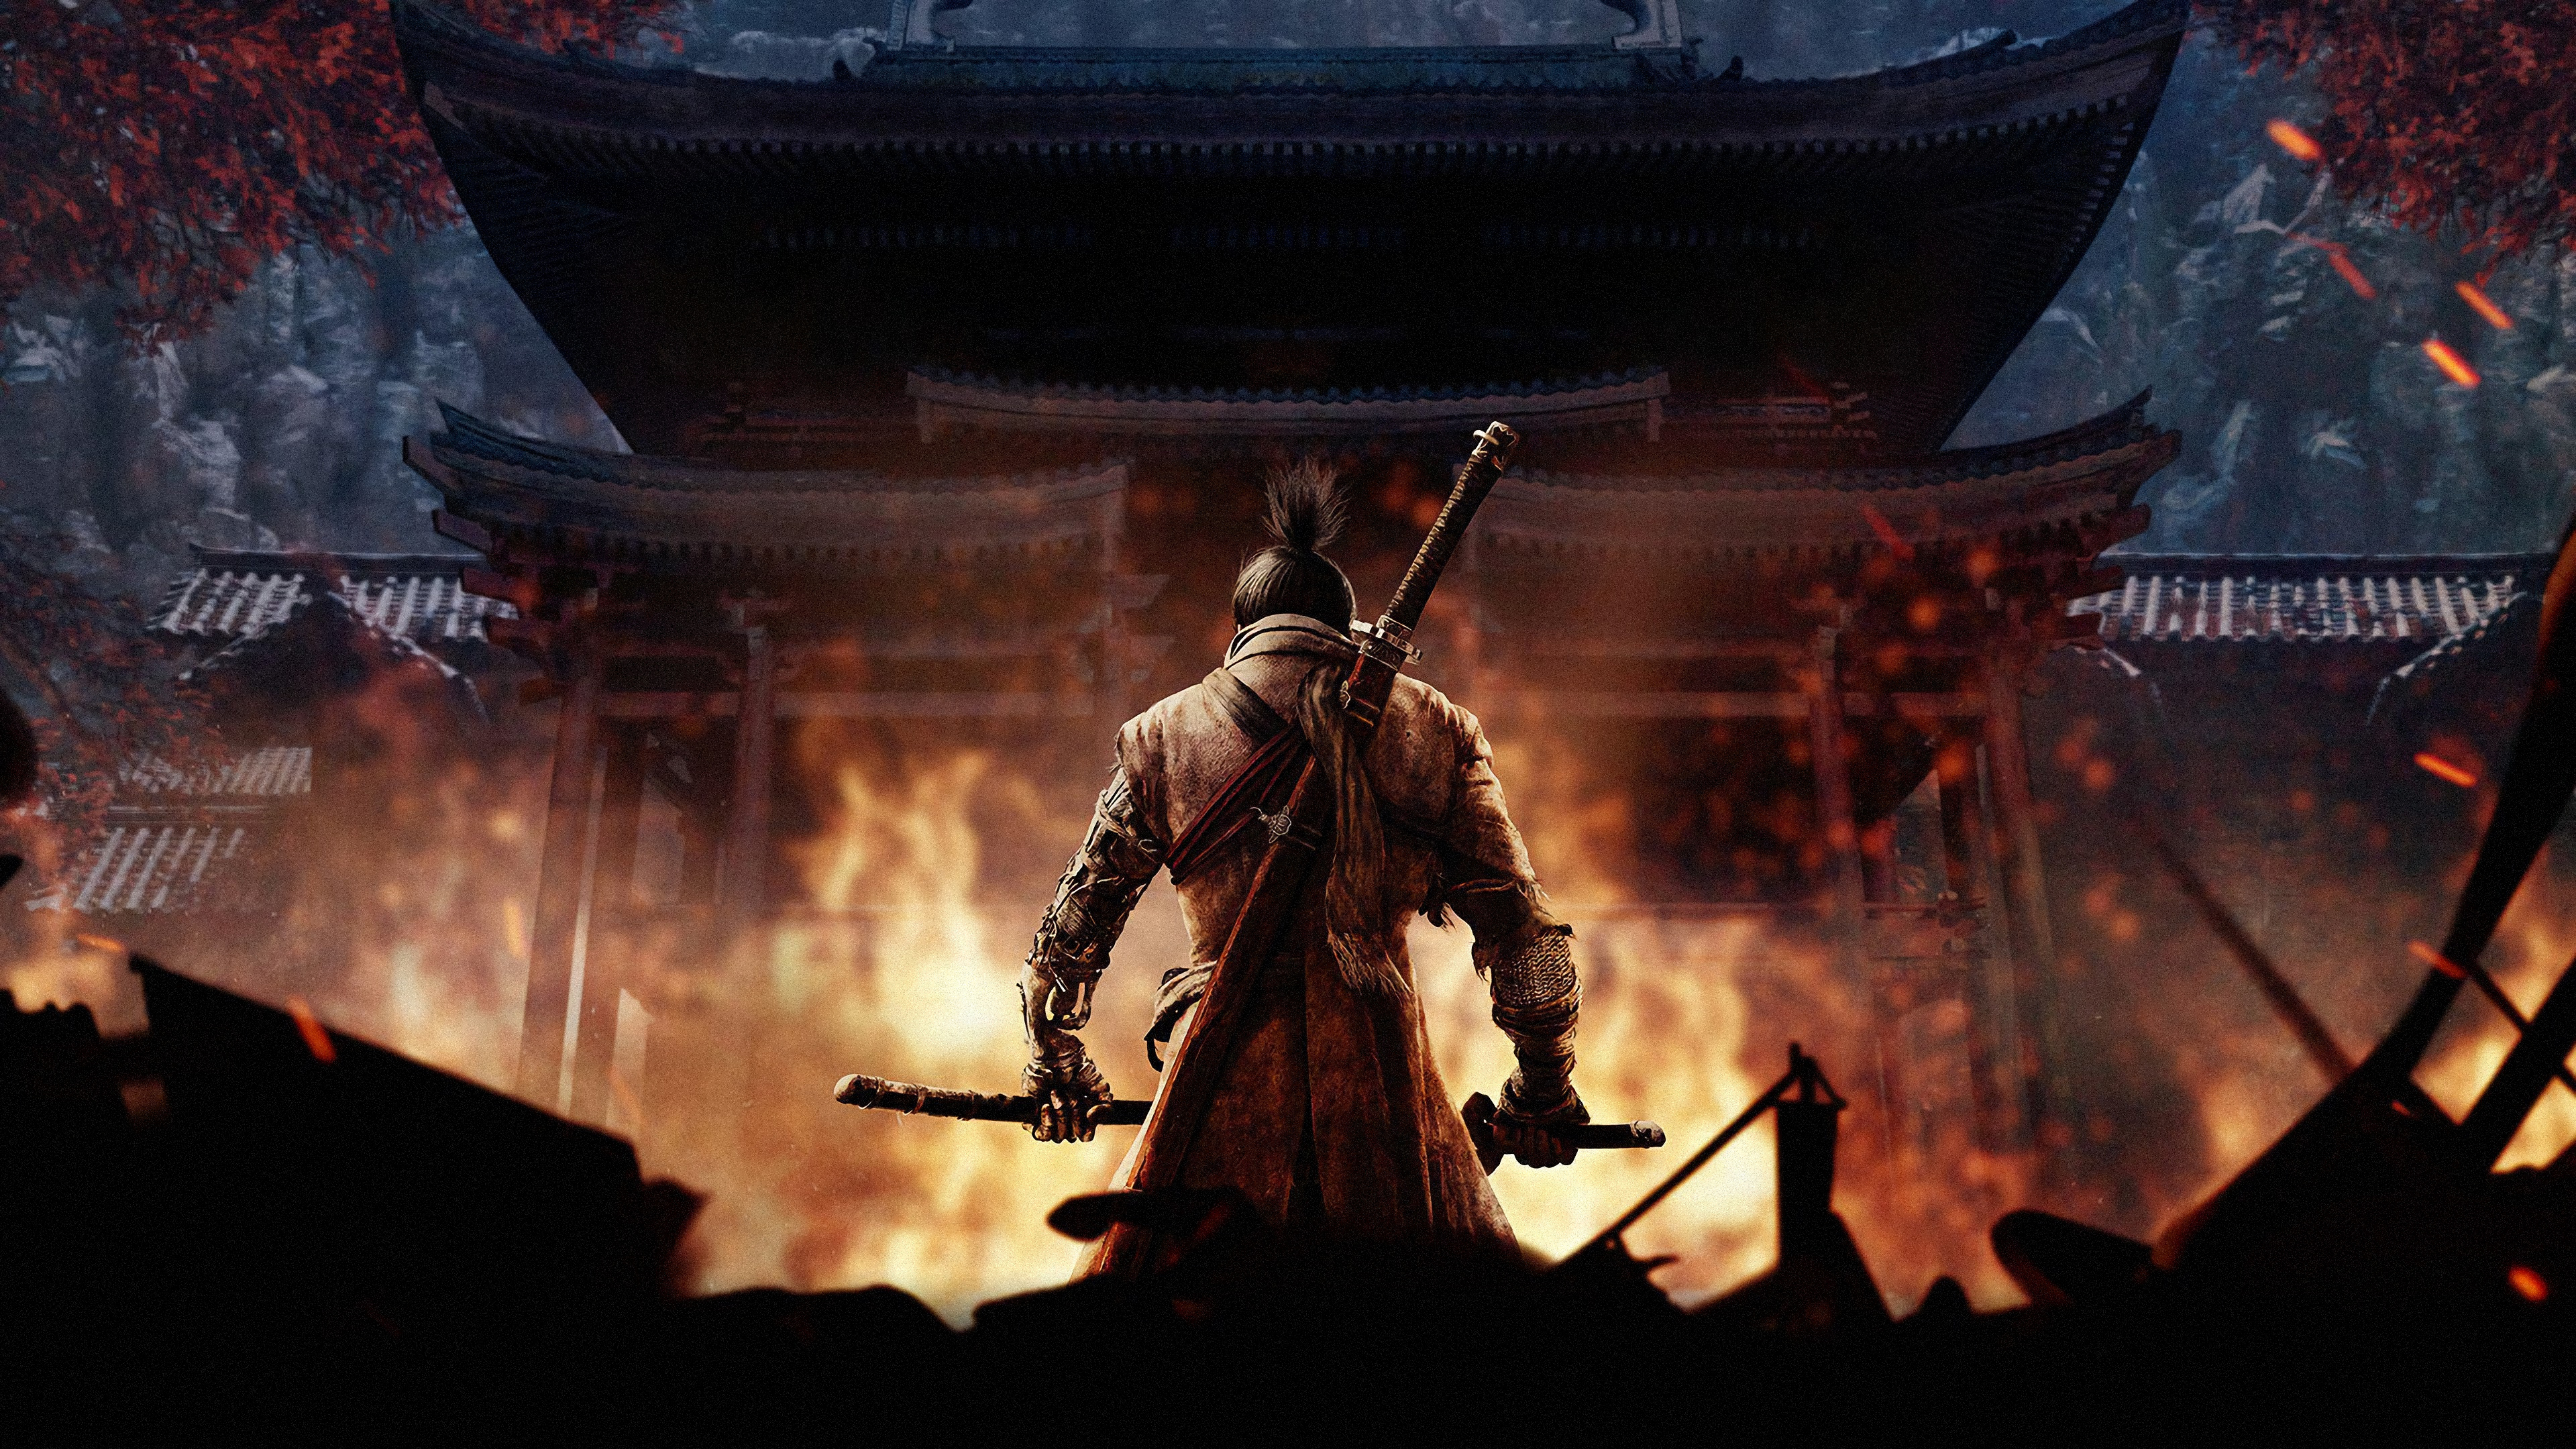 Top 11 Sekiro Shadows Die Twice Wallpapers In 4k And Full Hd